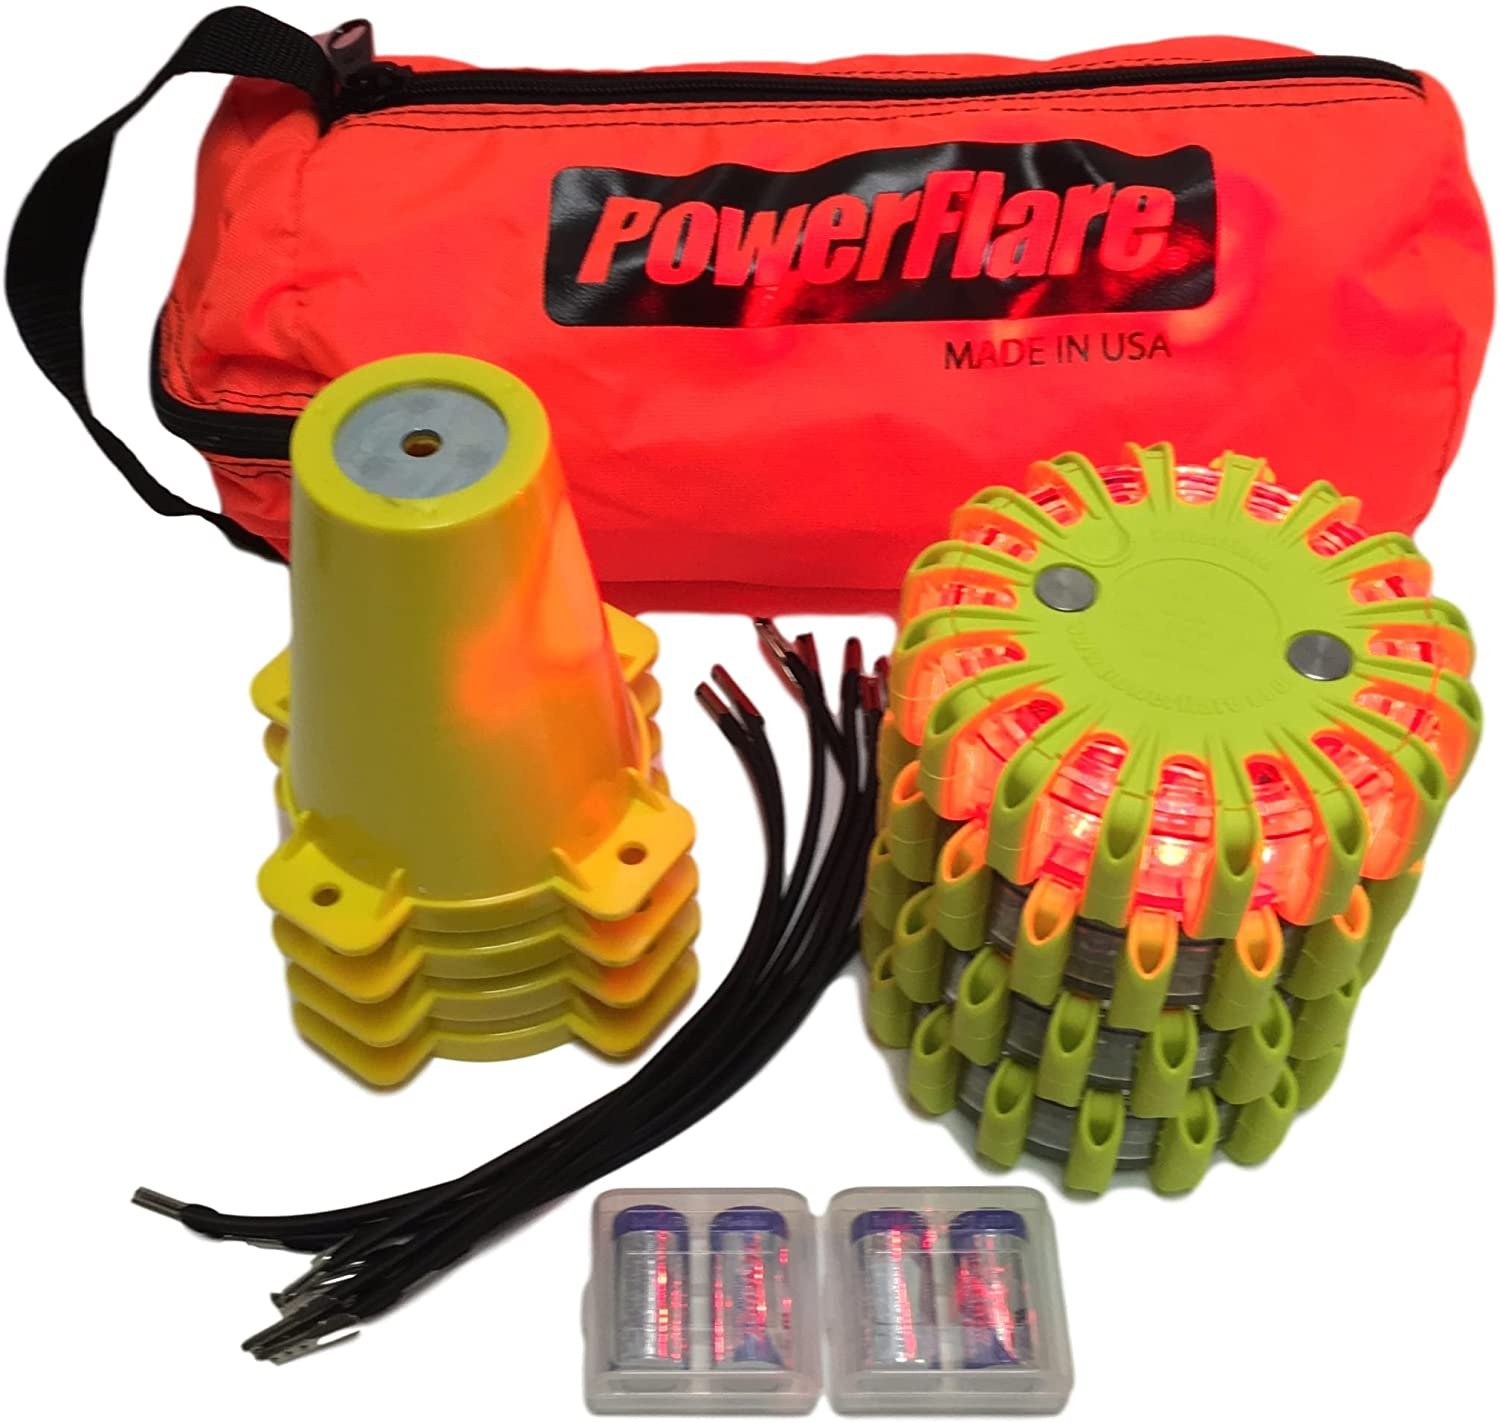 PowerFlare Cone Top Adapter Kit with 4 Pack Power Flares